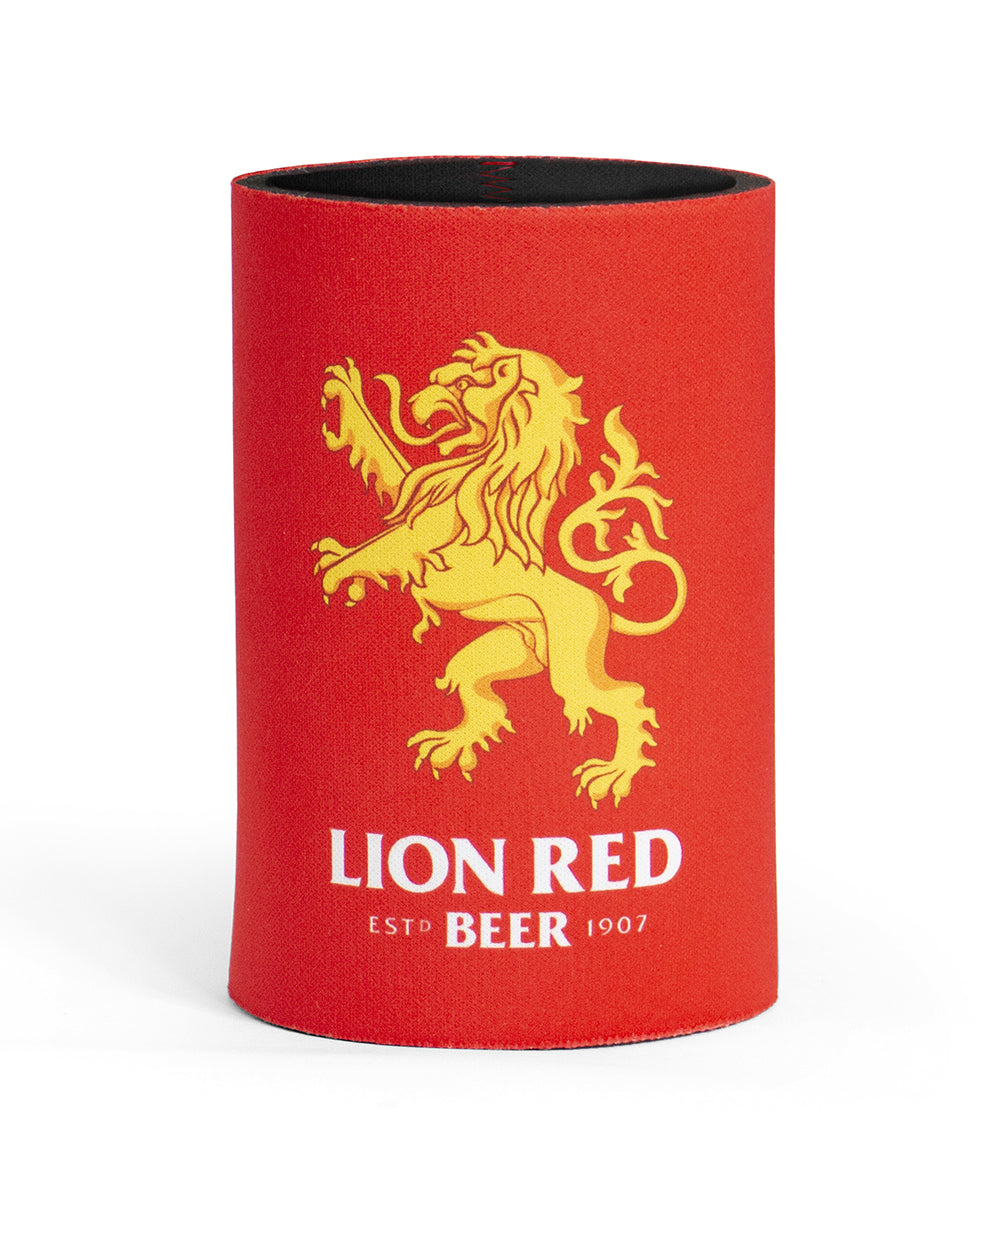 Lion Red Stubby Holder -  Beer Gear Apparel & Merchandise - speights - lion red - vb - tokyo dry merch